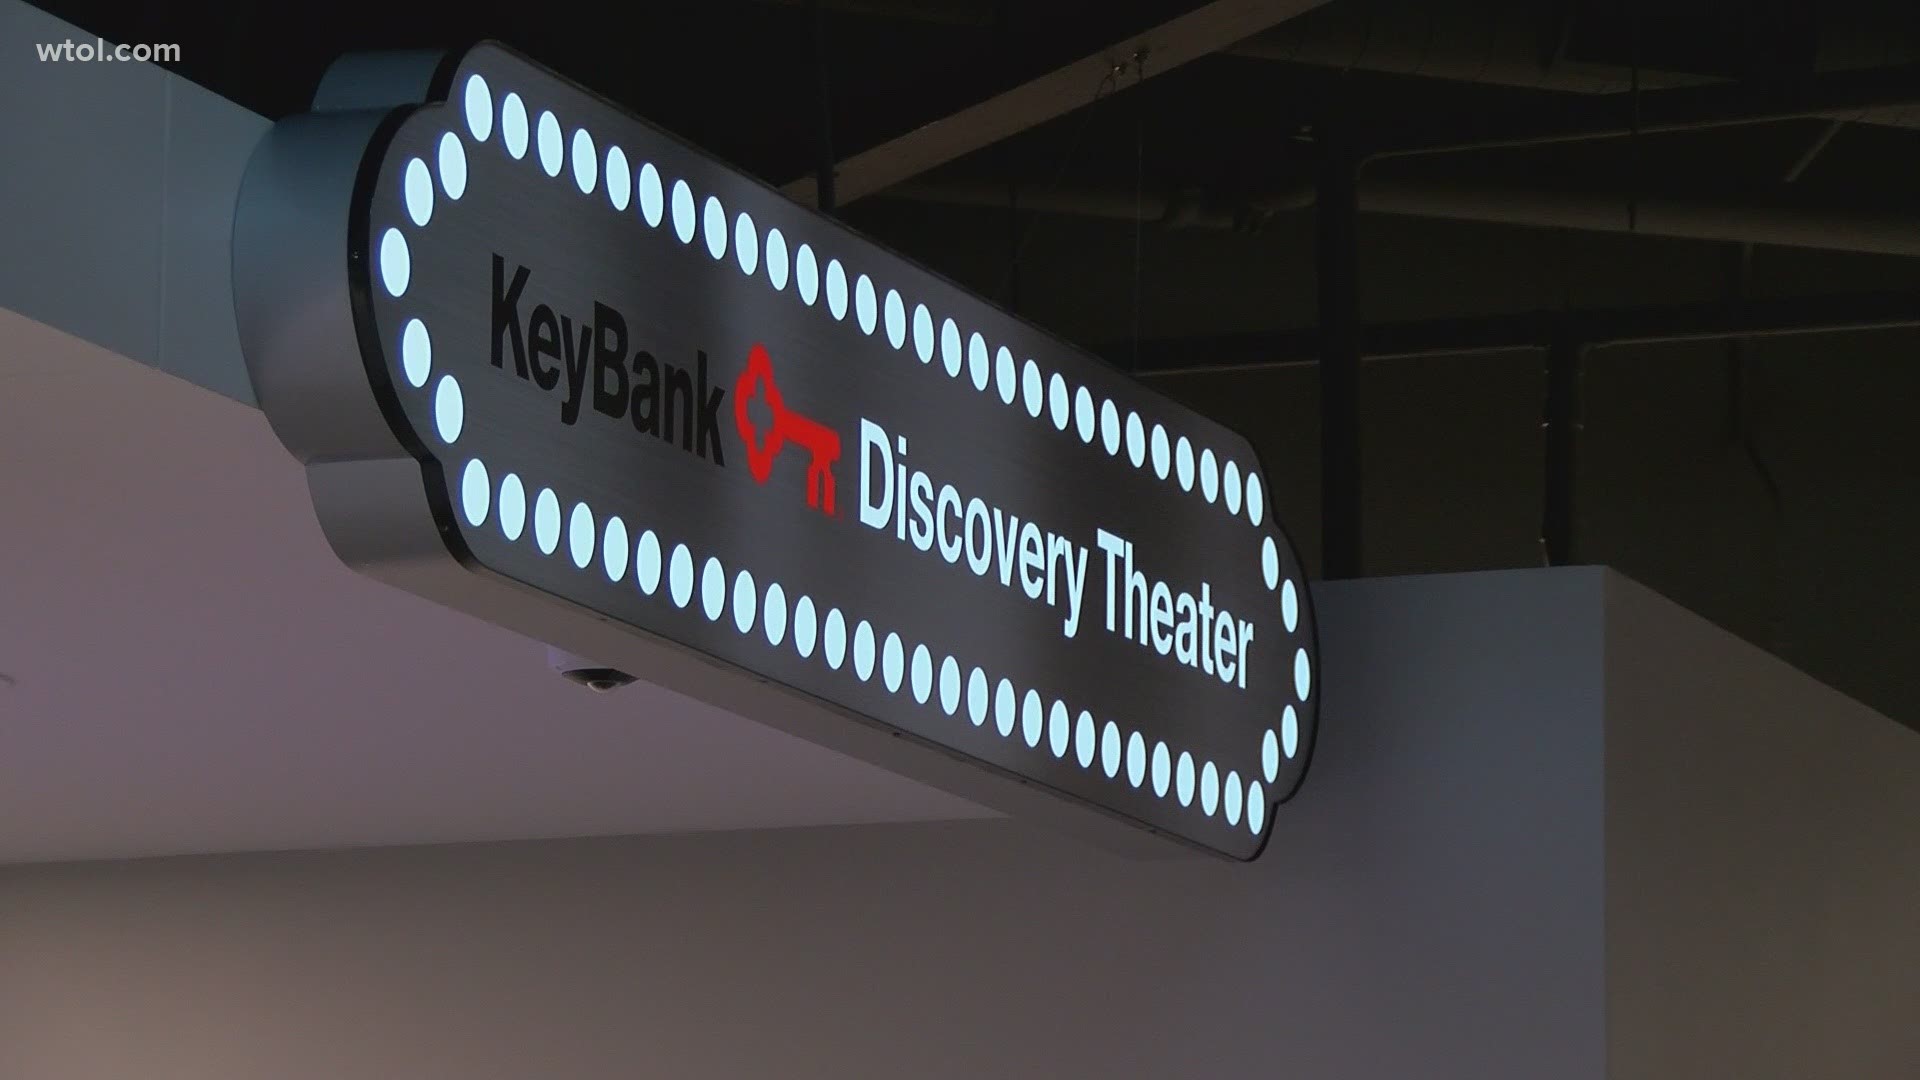 A ribbon cutting marked the opening of the KeyBank Discovery Theater, a new 58-foot wide screen with a 4K and 3D experience.